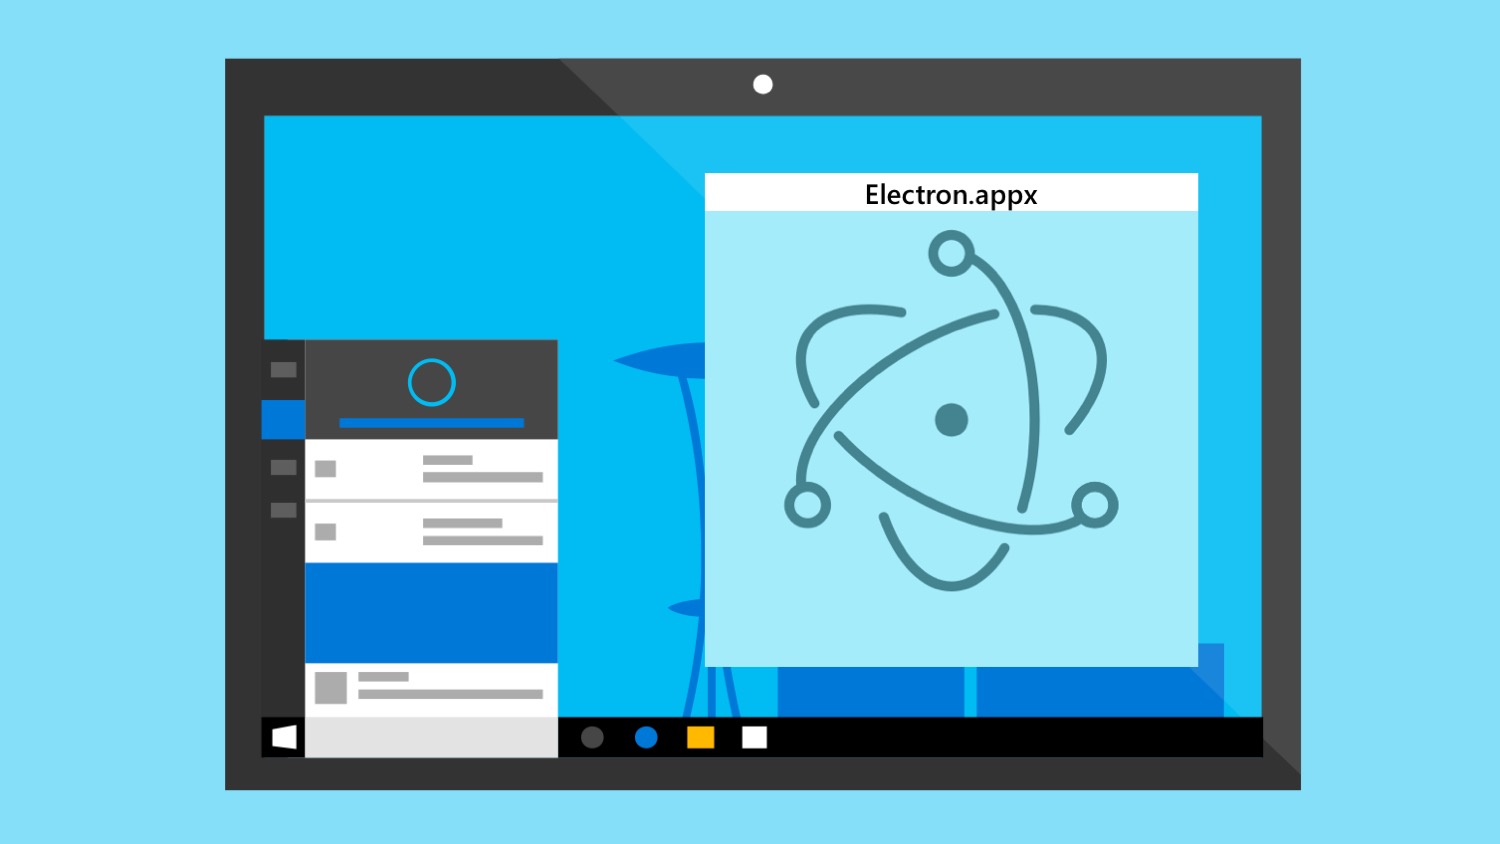 Developers can convert their Electron apps into Windows AppX packages